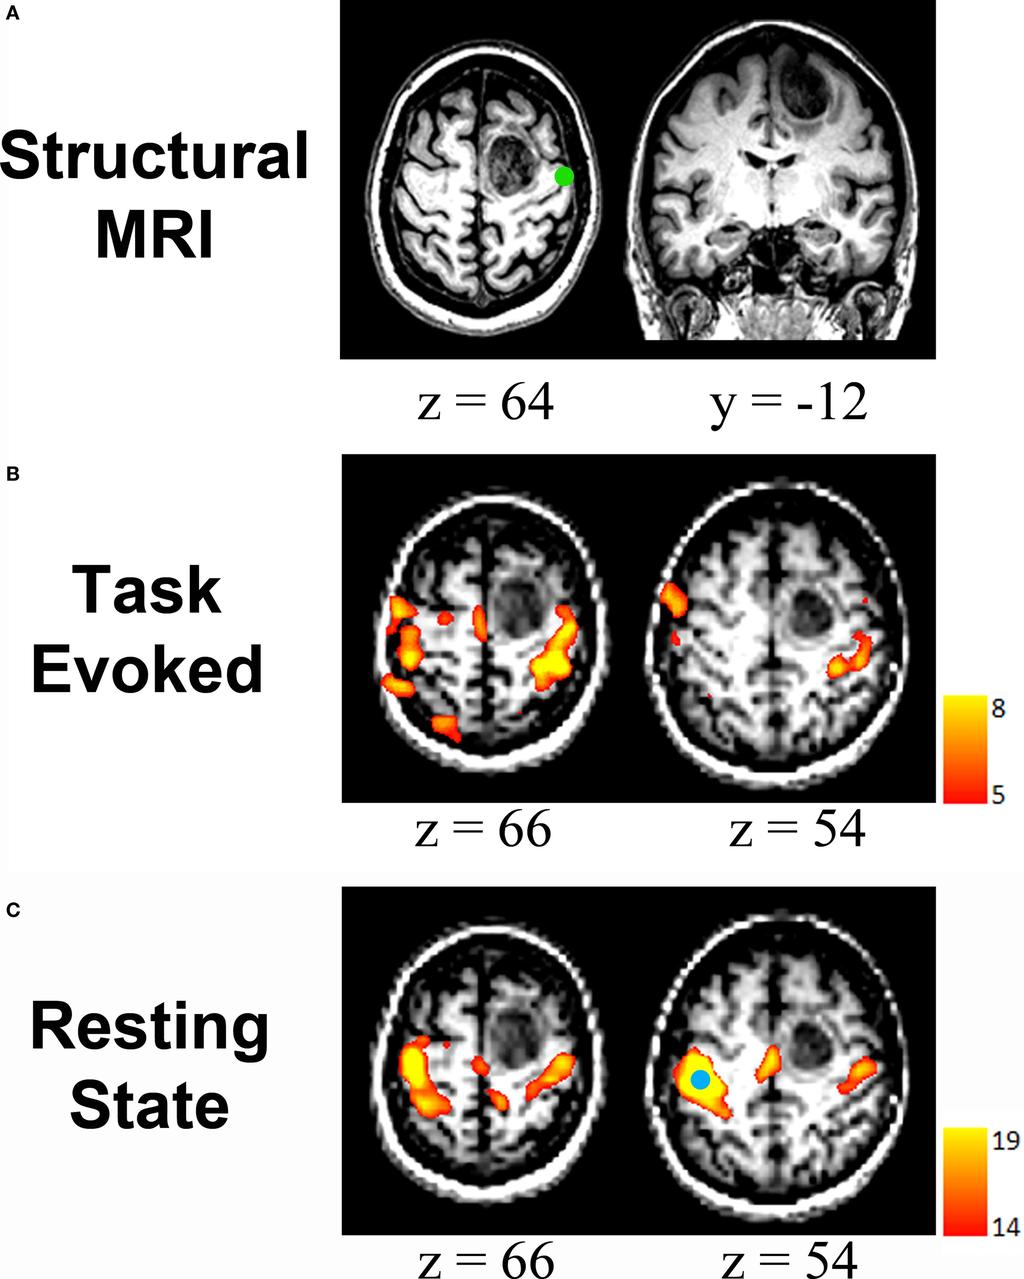 Figure 4 Resting state fcmri in pre-operative brain mapping: (A) Structural MRI scan showing a mass in the right frontal cortex.